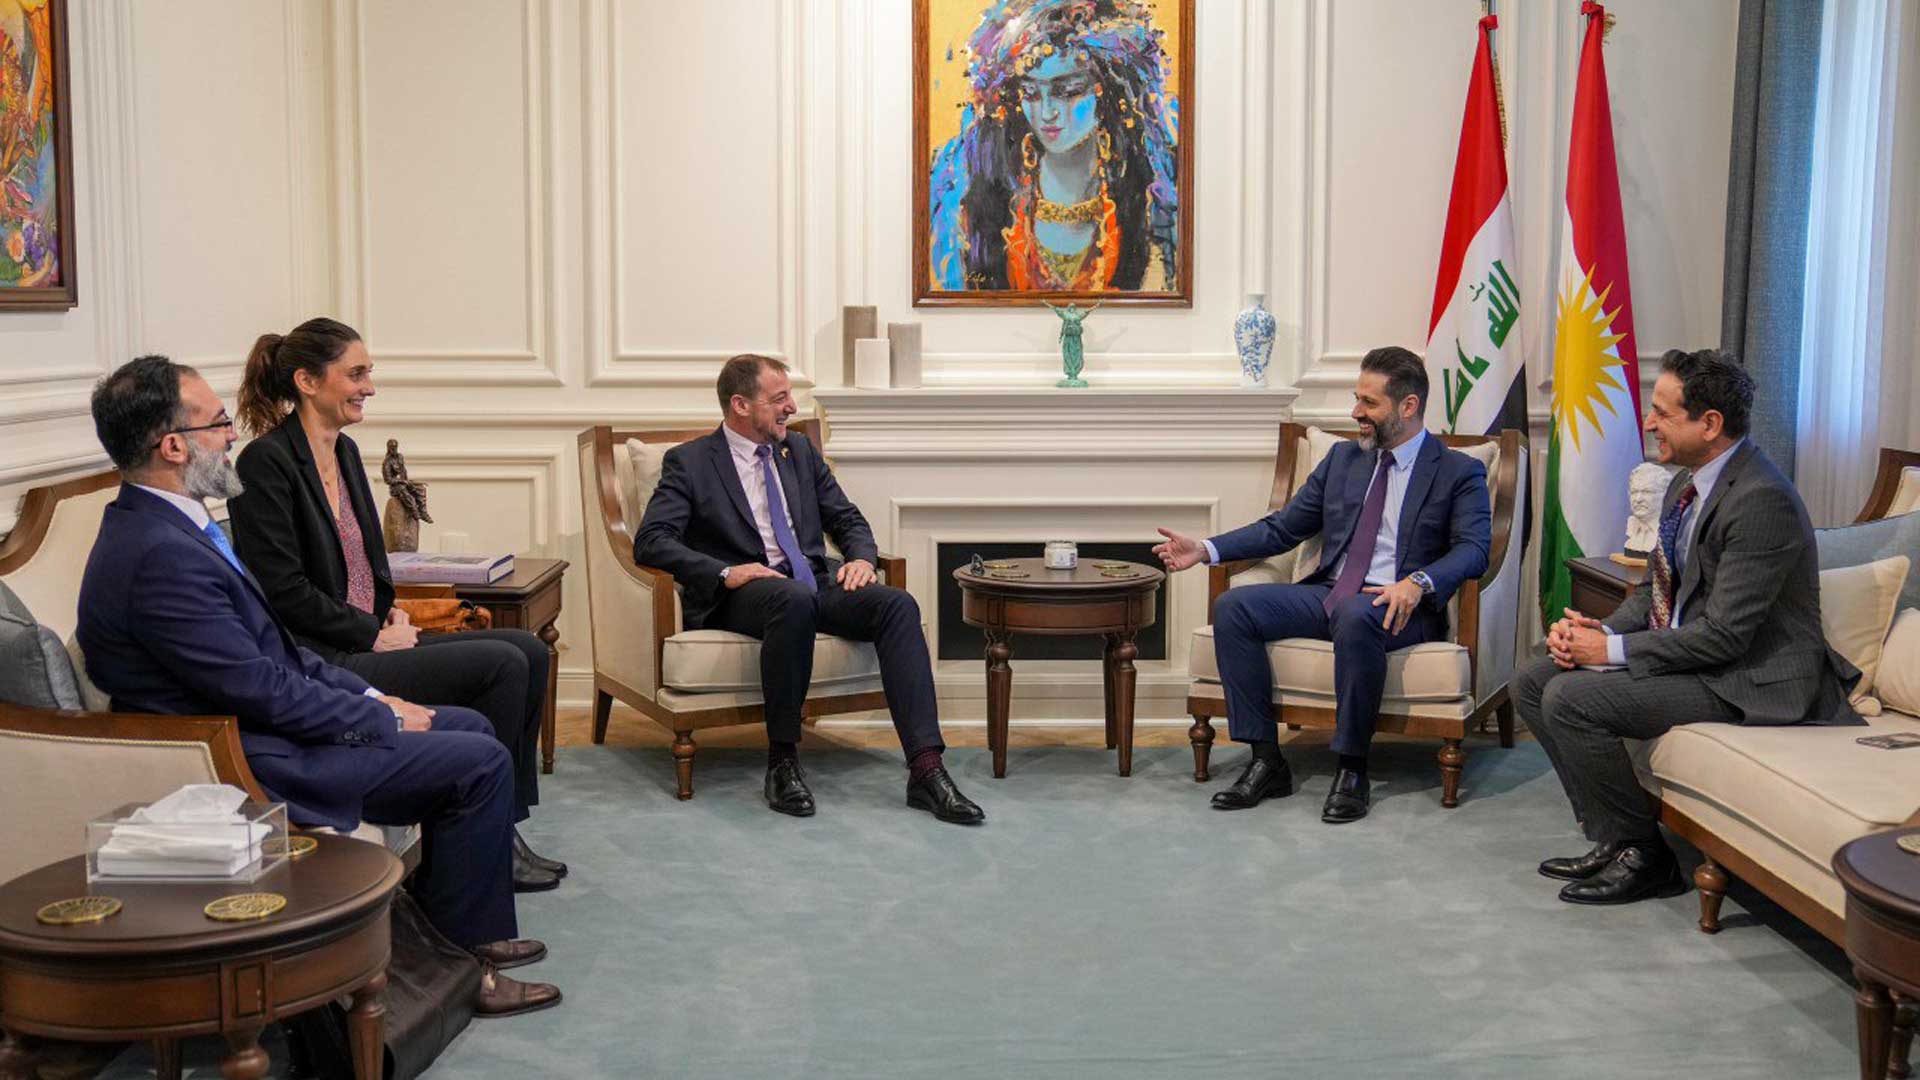  DPM Qubad Talabani on the right and French Consul Yann Braem on the left.